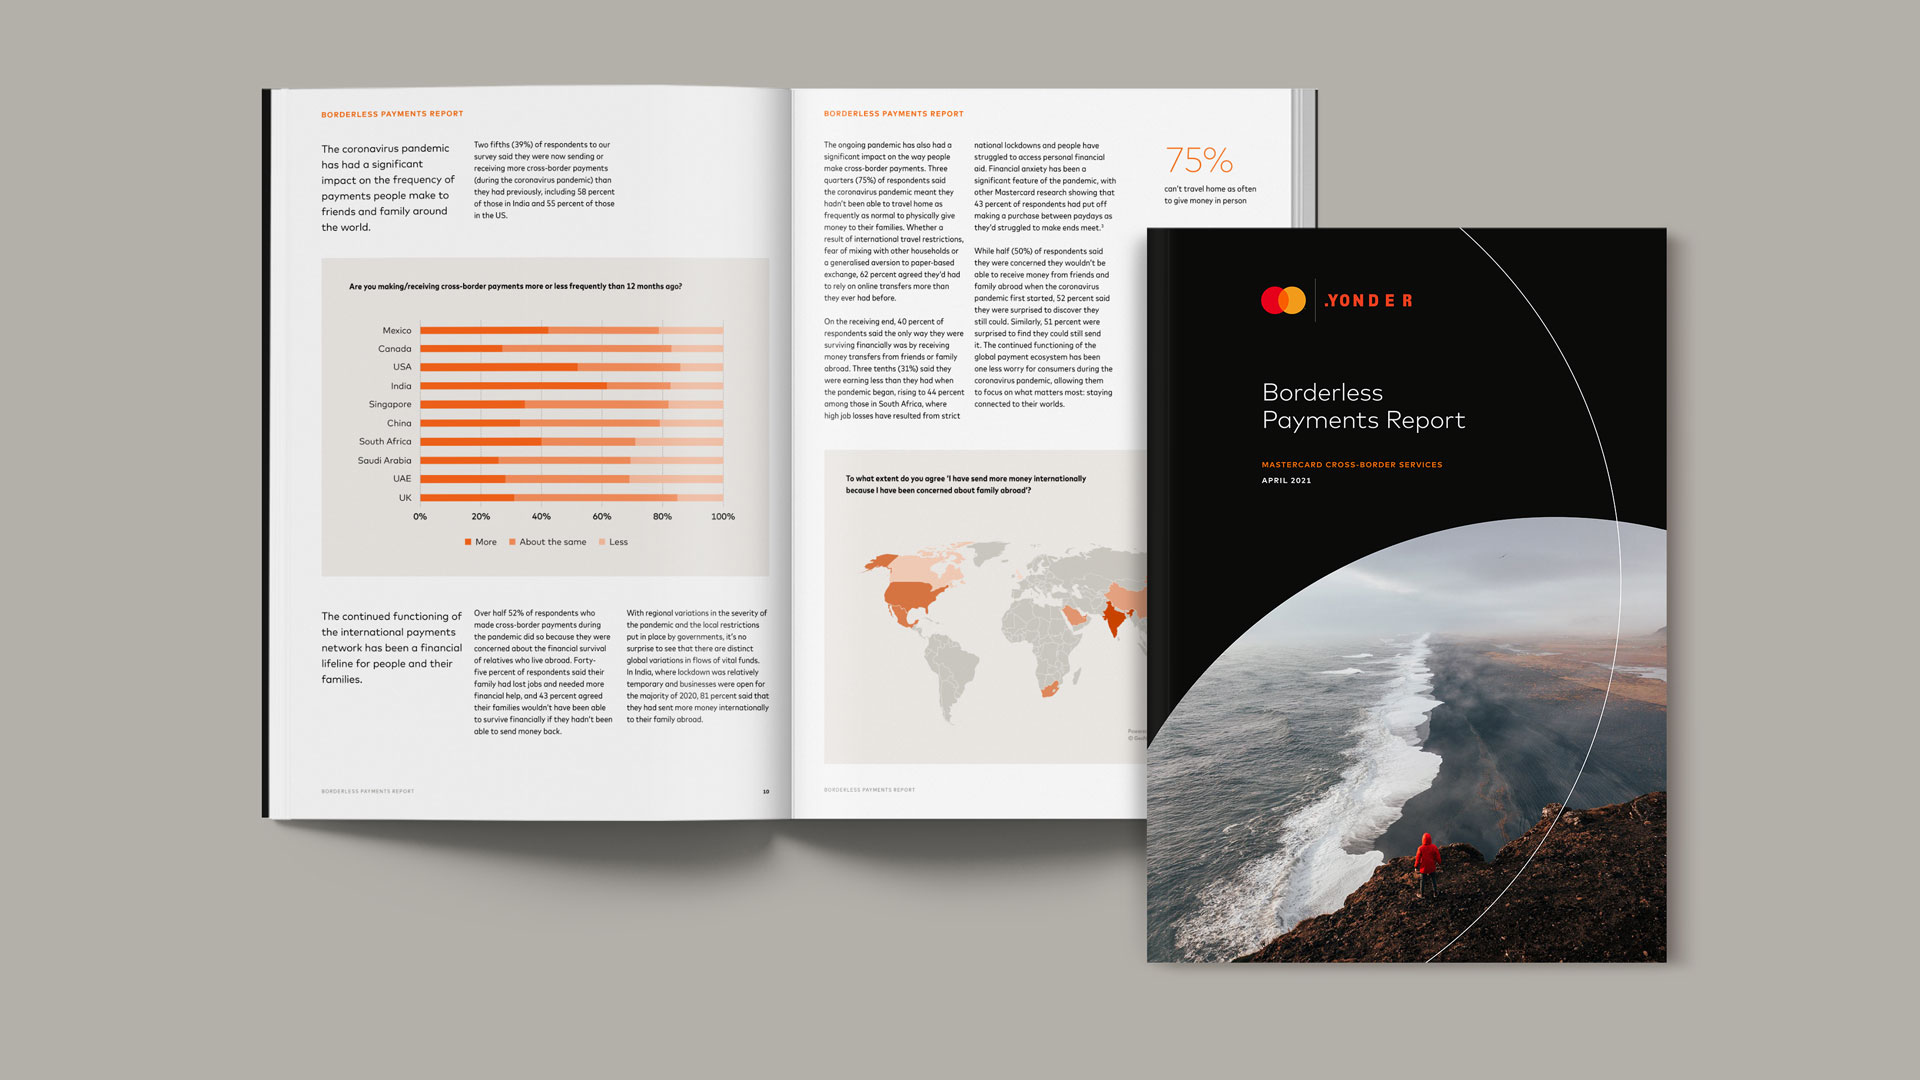 Mastercard's borderless payments report